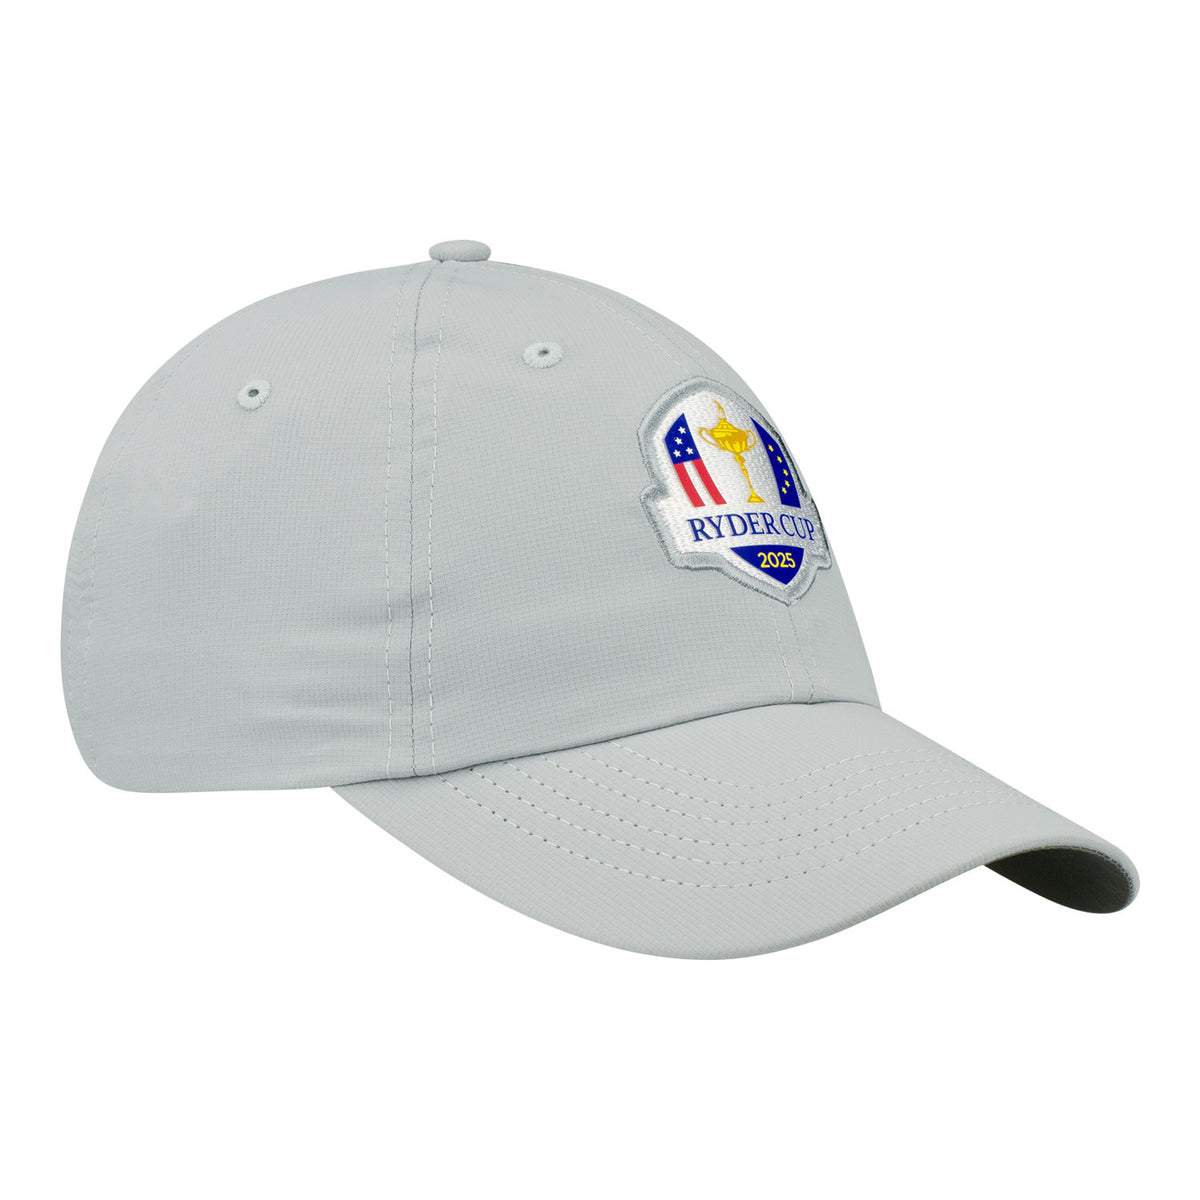 Imperial 2025 Ryder Cup Performance Hat in Fog - Angled Front Right View